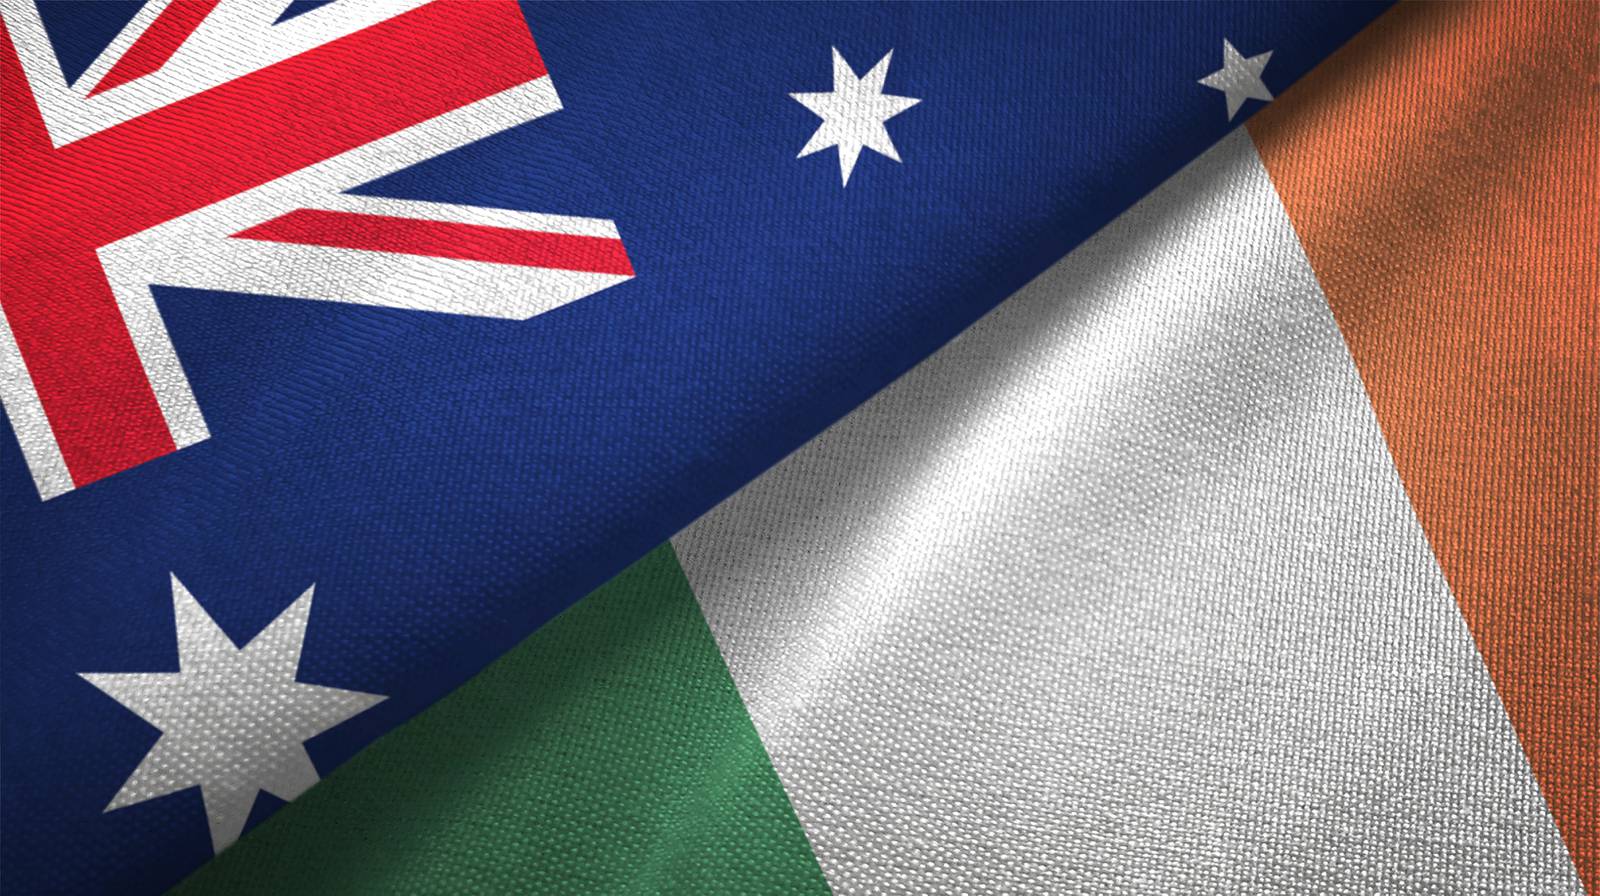 Ireland and Australia two flags together realations textile cloth fabric texture